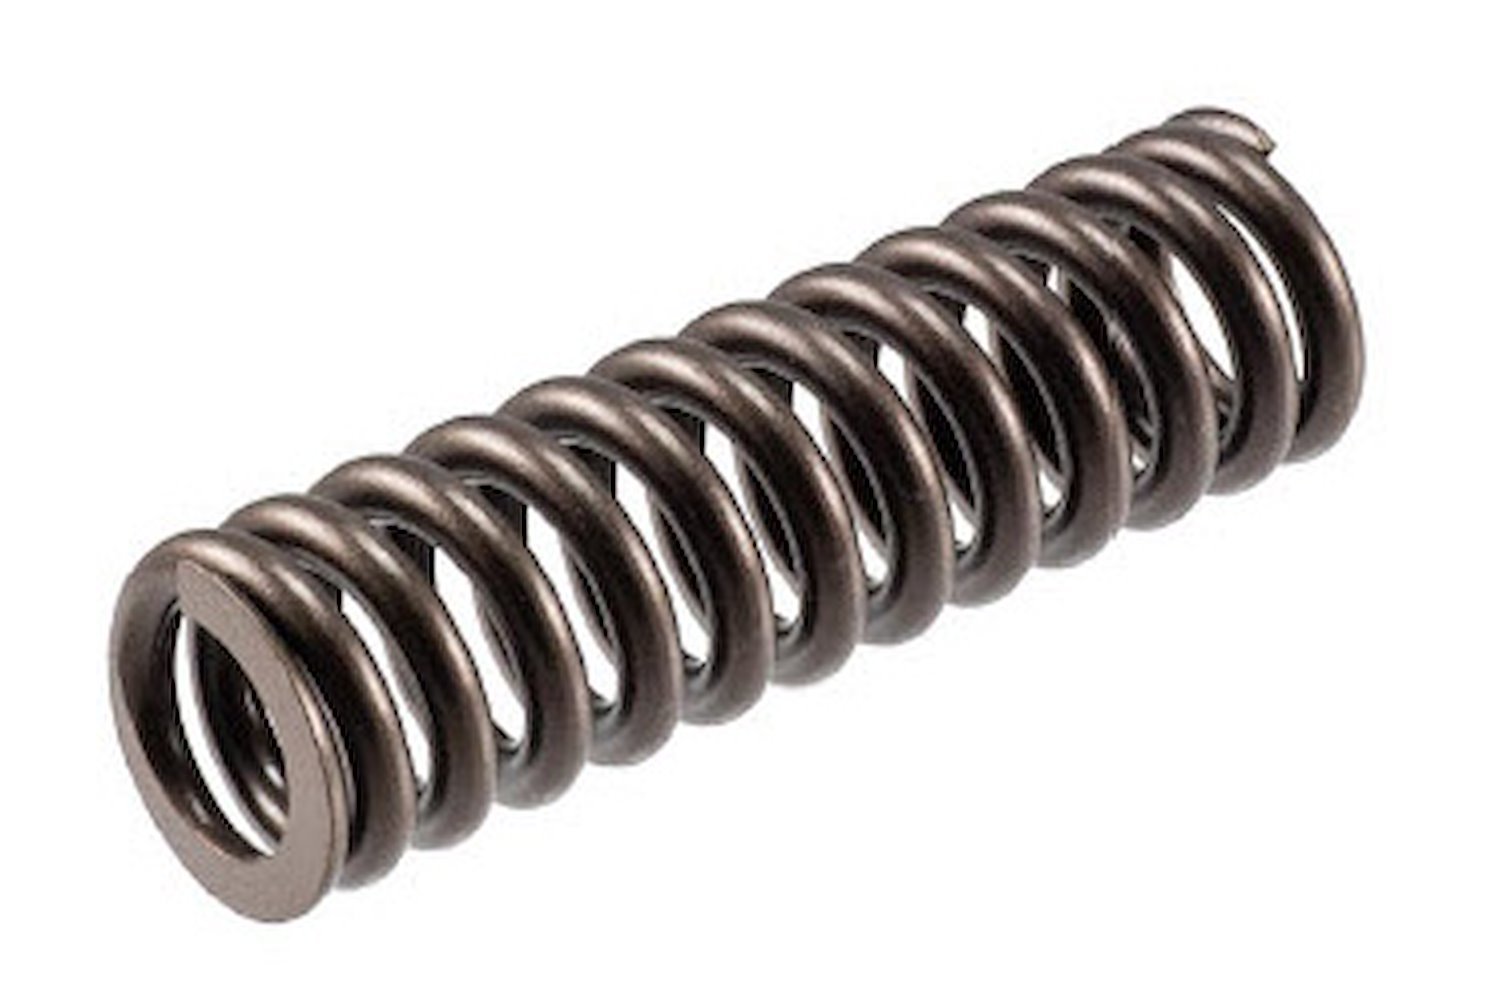 Valve Spring for Select Heavy-Duty/Industrial Application with Cummins 10.8L Engine